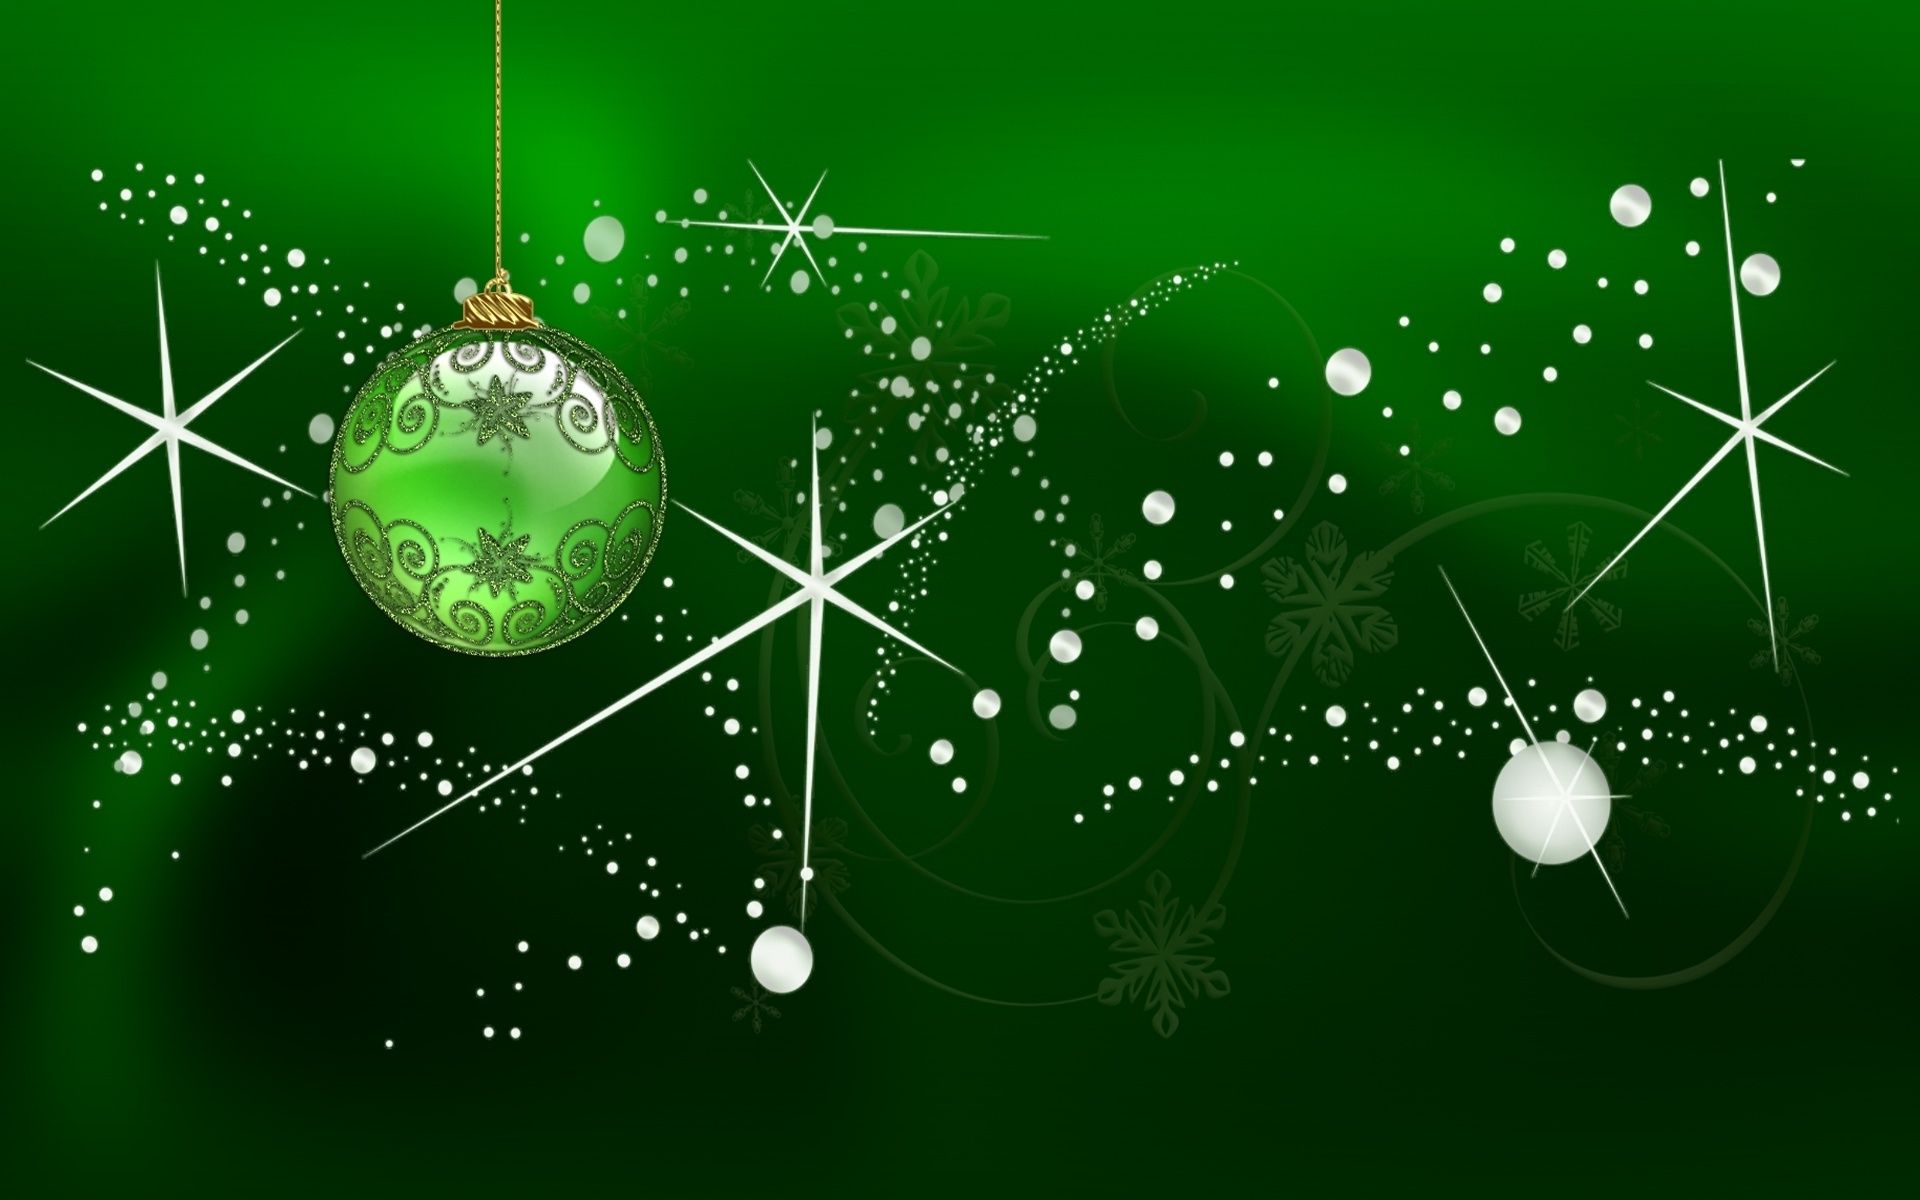 1920x1200 Free Download Green Lights And Balls Xmas Wallpaper Hd Wallpaper 1920x1200 For Your Desktop Mobile Tablet Explore Xmas Wallpaper Christmas Wallpaper For Desktop Xmas Wallpaper Windows 7 Xmas Wallpaper